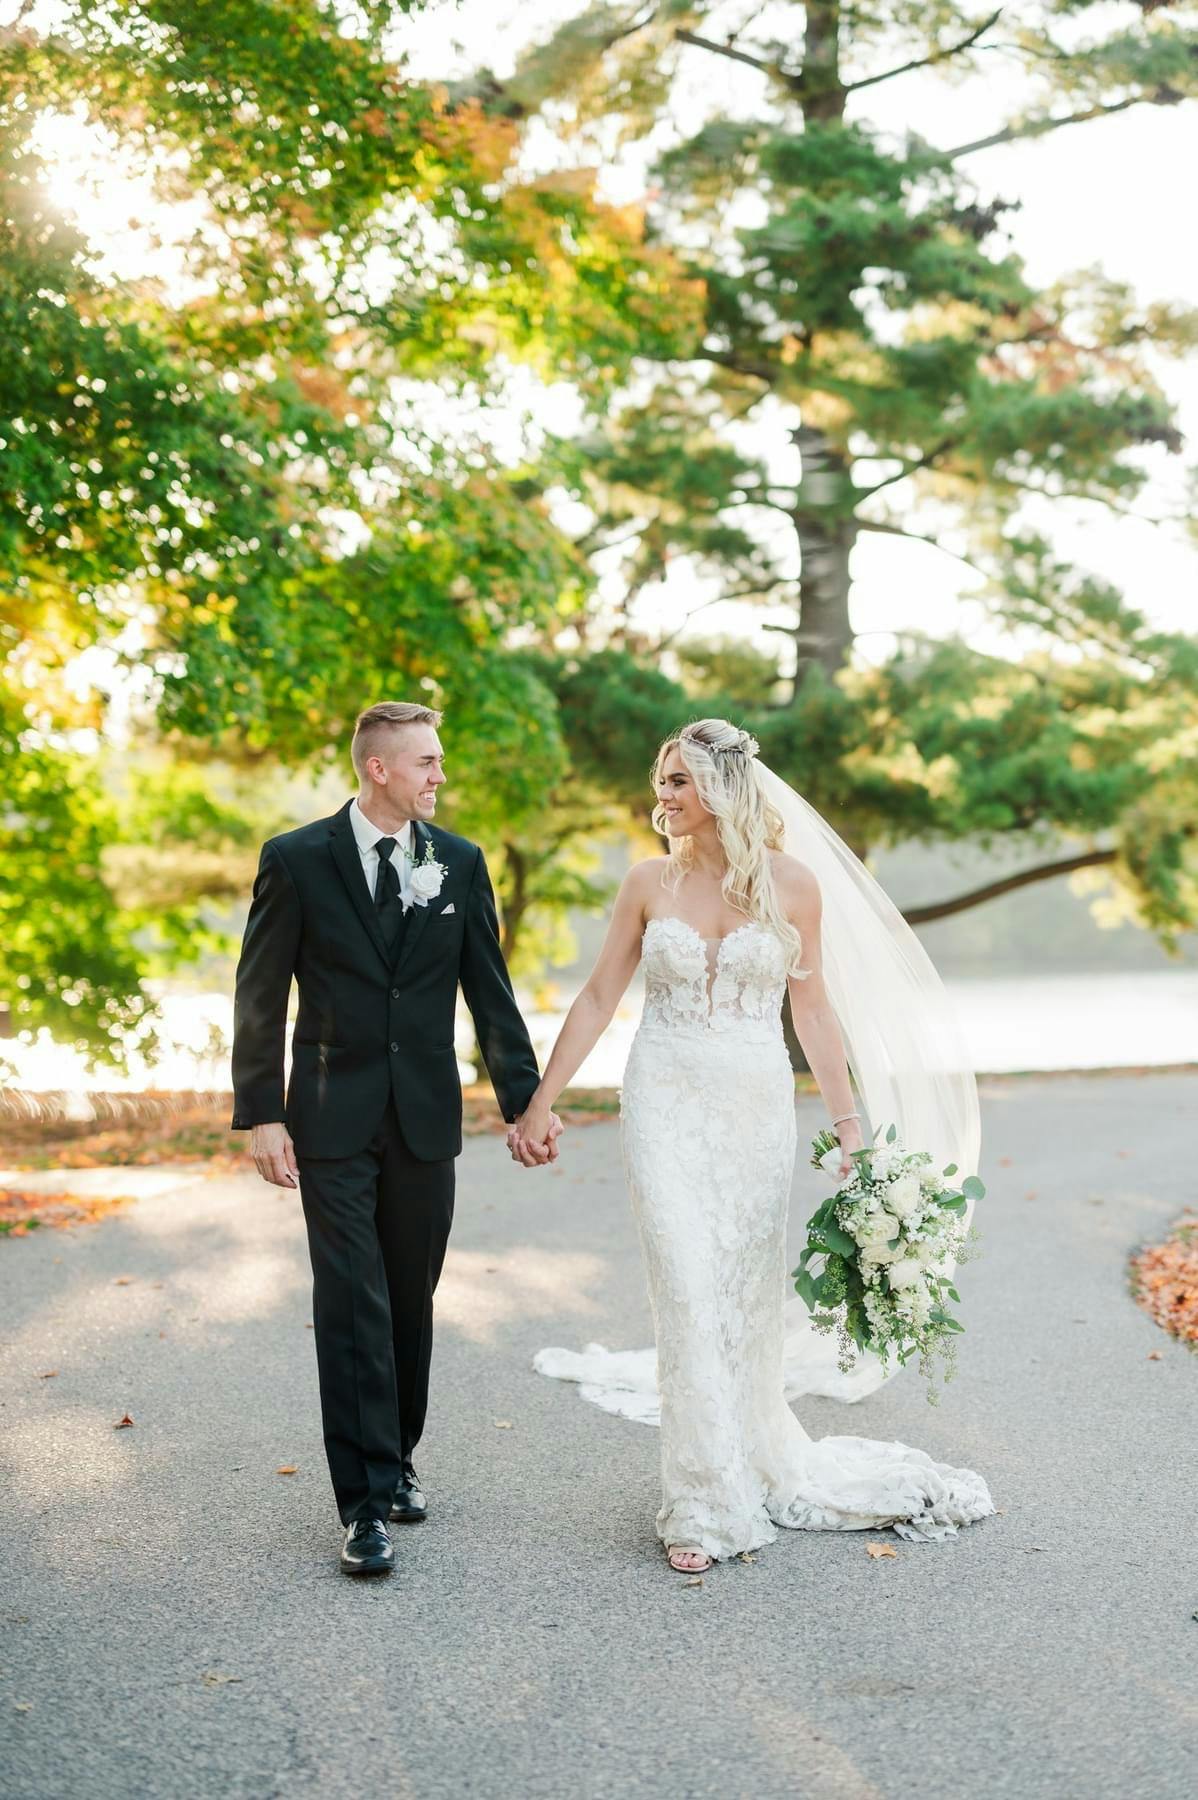 Picture of Bride and groom holding hands walking down a lane with trees in the background